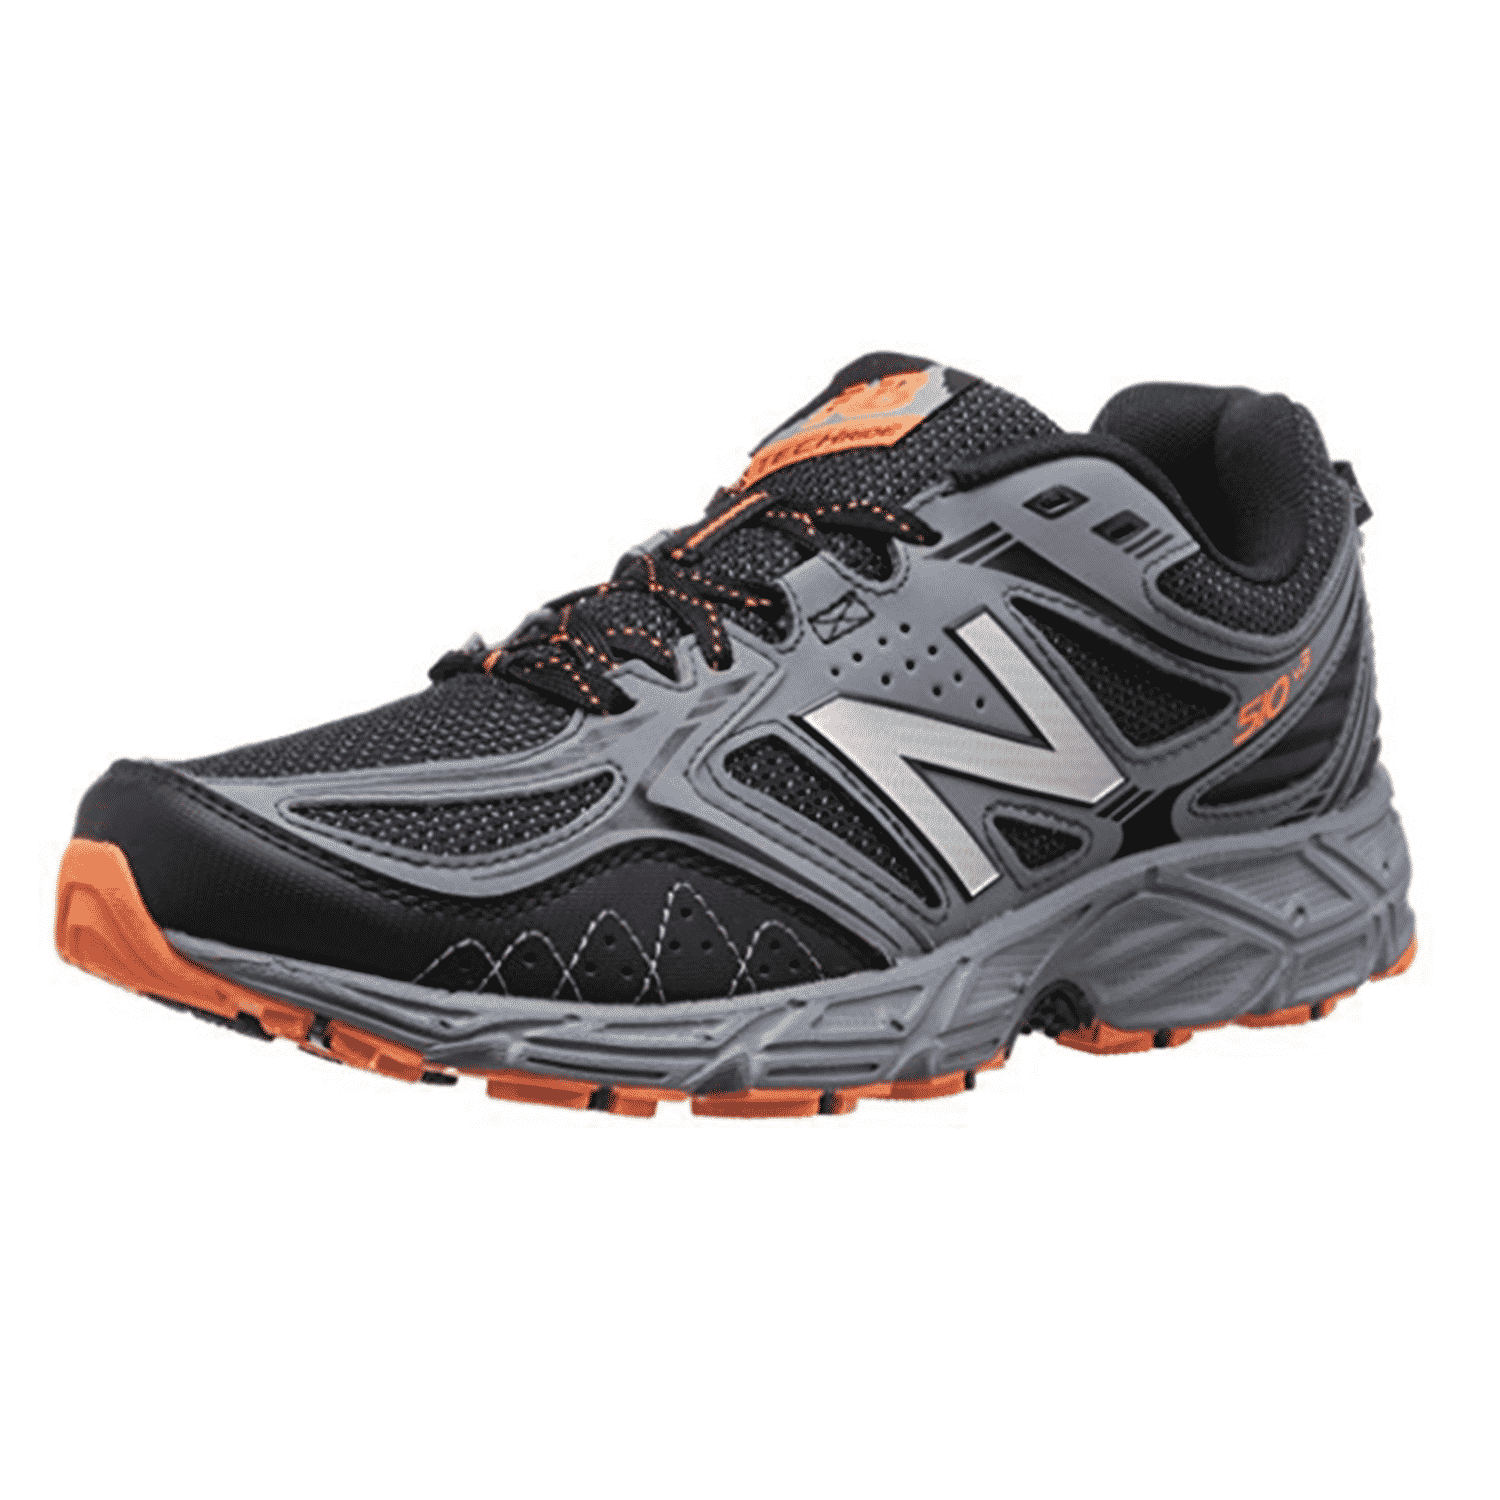 Top 10 Best Trail Running Shoes in 2023 Reviews | Buyer's Guide